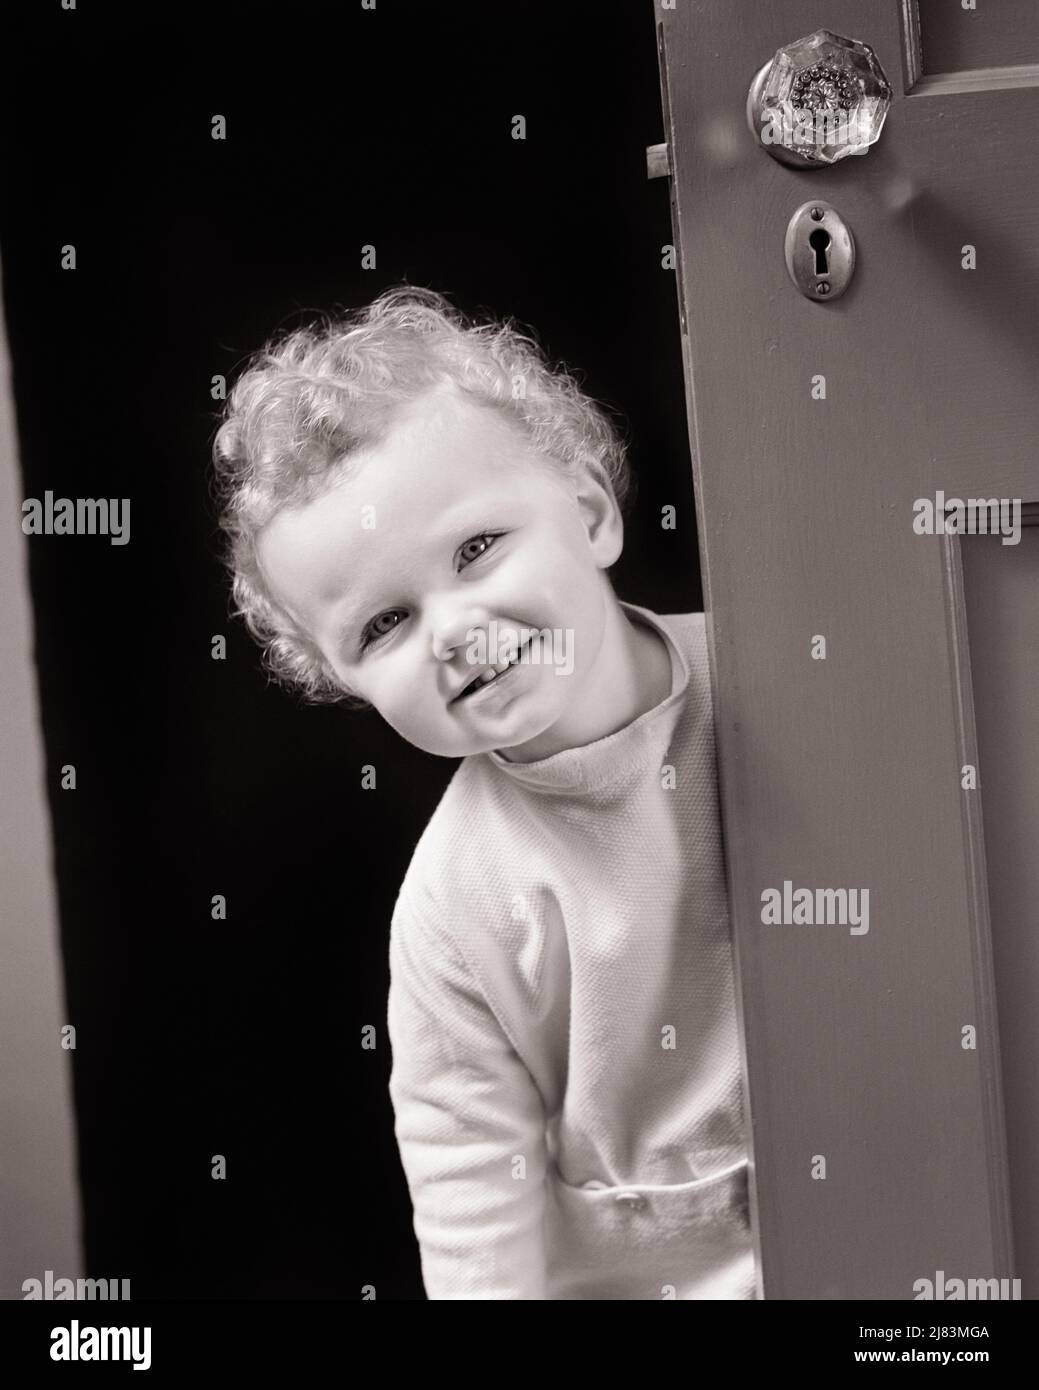 1930s 1940s SMILING LITTLE GIRL WITH CURLY HAIR PEEKING AROUND A DOOR - j2599 HAR001 HARS SATISFACTION FEMALES WINNING STUDIO SHOT HEALTHINESS HOME LIFE COPY SPACE FRIENDSHIP HALF-LENGTH PAJAMAS CONFIDENCE B&W EYE CONTACT HAPPINESS CHEERFUL ADVENTURE DISCOVERY CURLY SMILES JOYFUL PLEASANT AGREEABLE CHARMING GROWTH JUVENILES LOVABLE PLEASING ADORABLE APPEALING BABY GIRL BLACK AND WHITE CAUCASIAN ETHNICITY HAR001 OLD FASHIONED Stock Photo